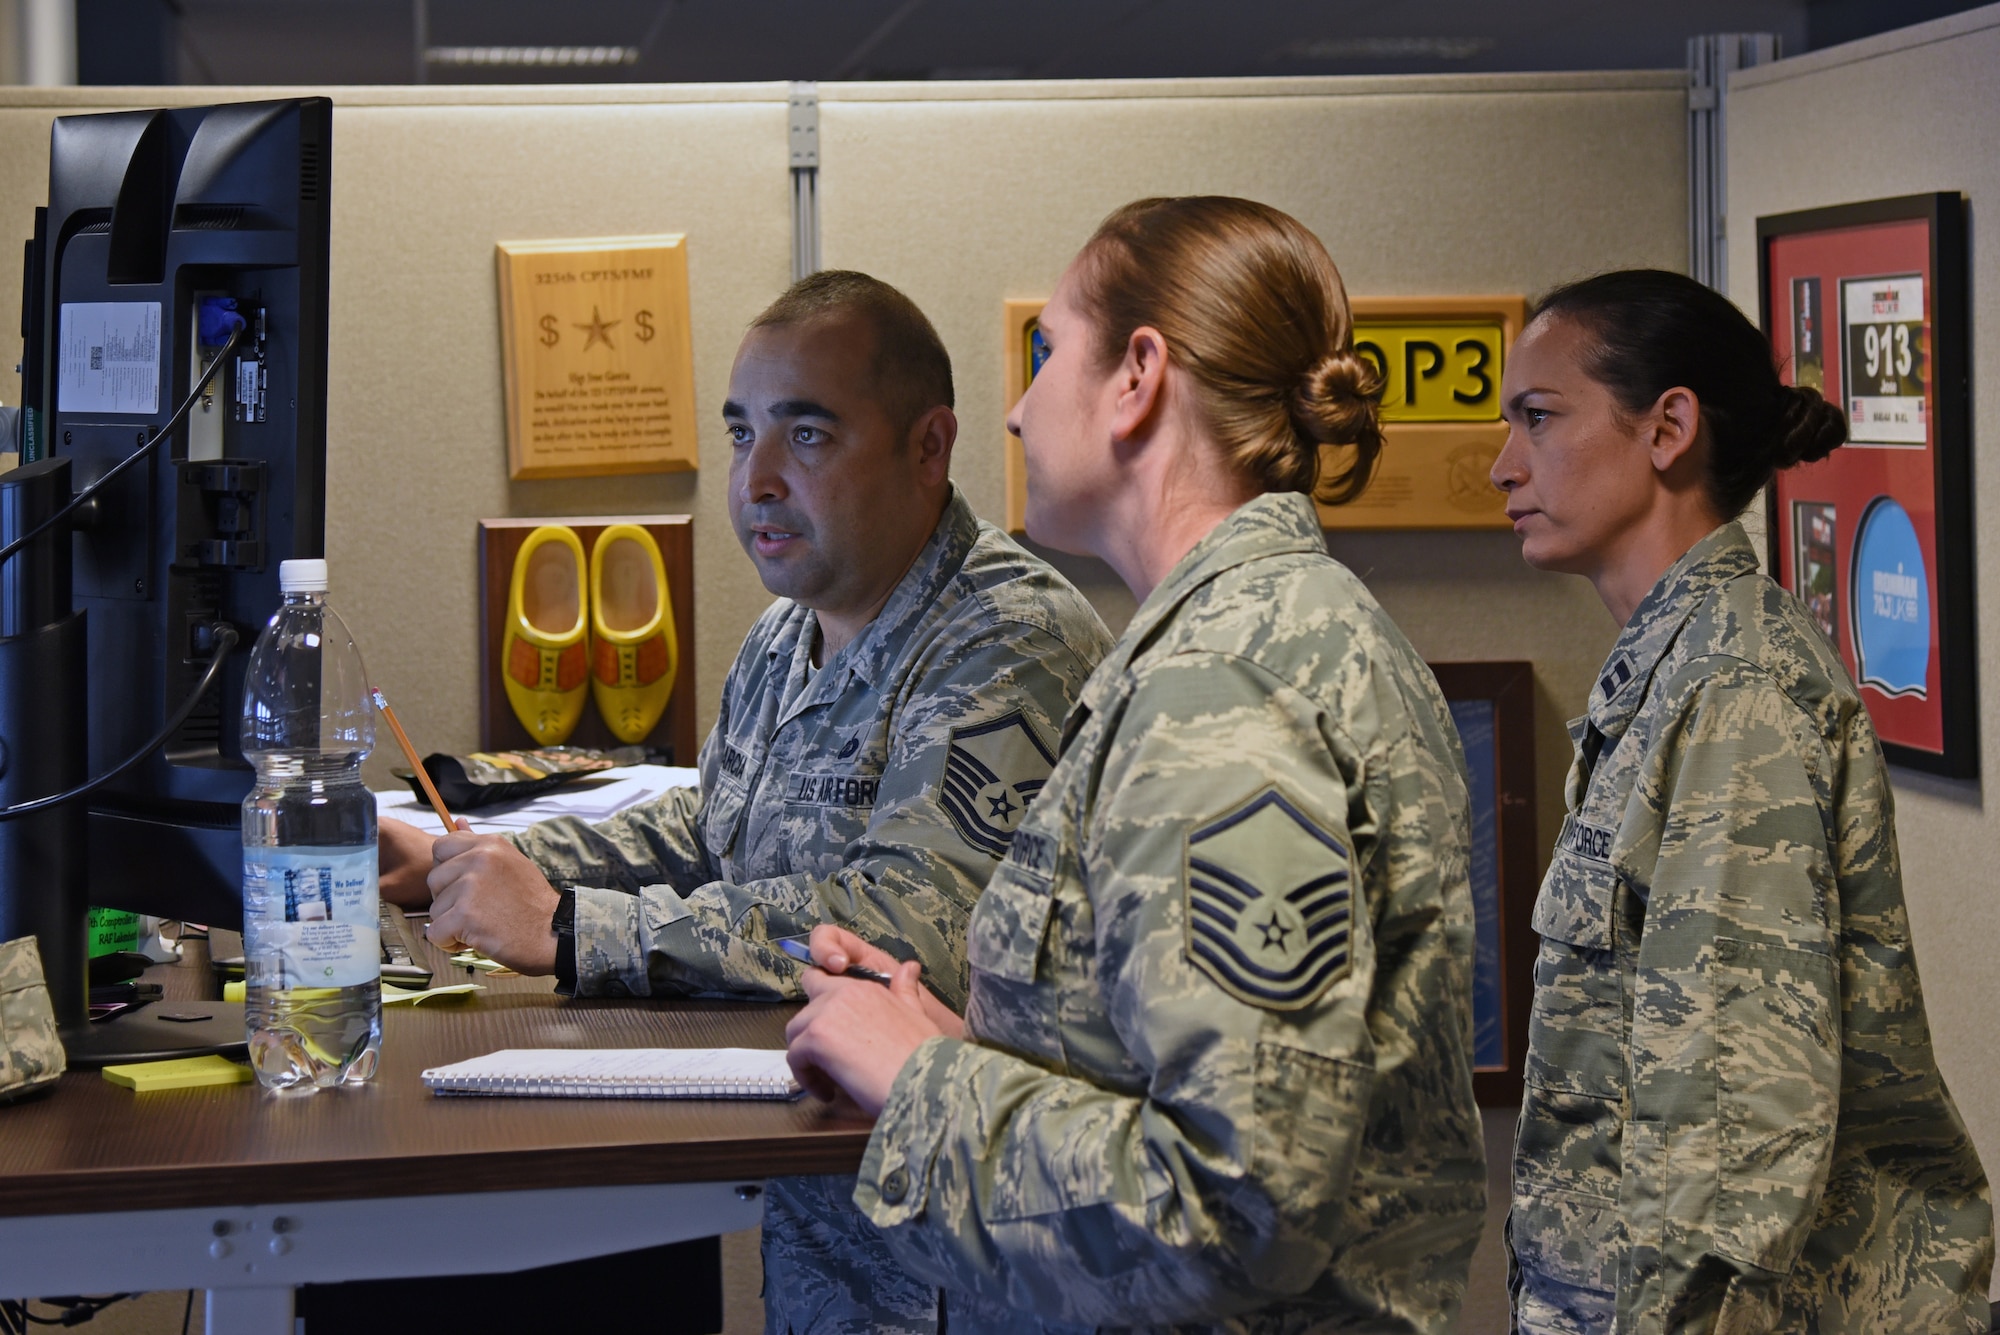 Airmen from the 161st and 48th Comptroller Squadrons work together to complete travel vouchers during a two-week training exercise at Royal Air Force Lakenheath, England May 30, 2018. The Arizona Air National Guard Airmen spent two weeks working alongside Airmen from the 48th CPTS to gain valuable knowledge and improve mission readiness. (U.S. Air National Guard photo by Staff Sgt. Dillon Davis)